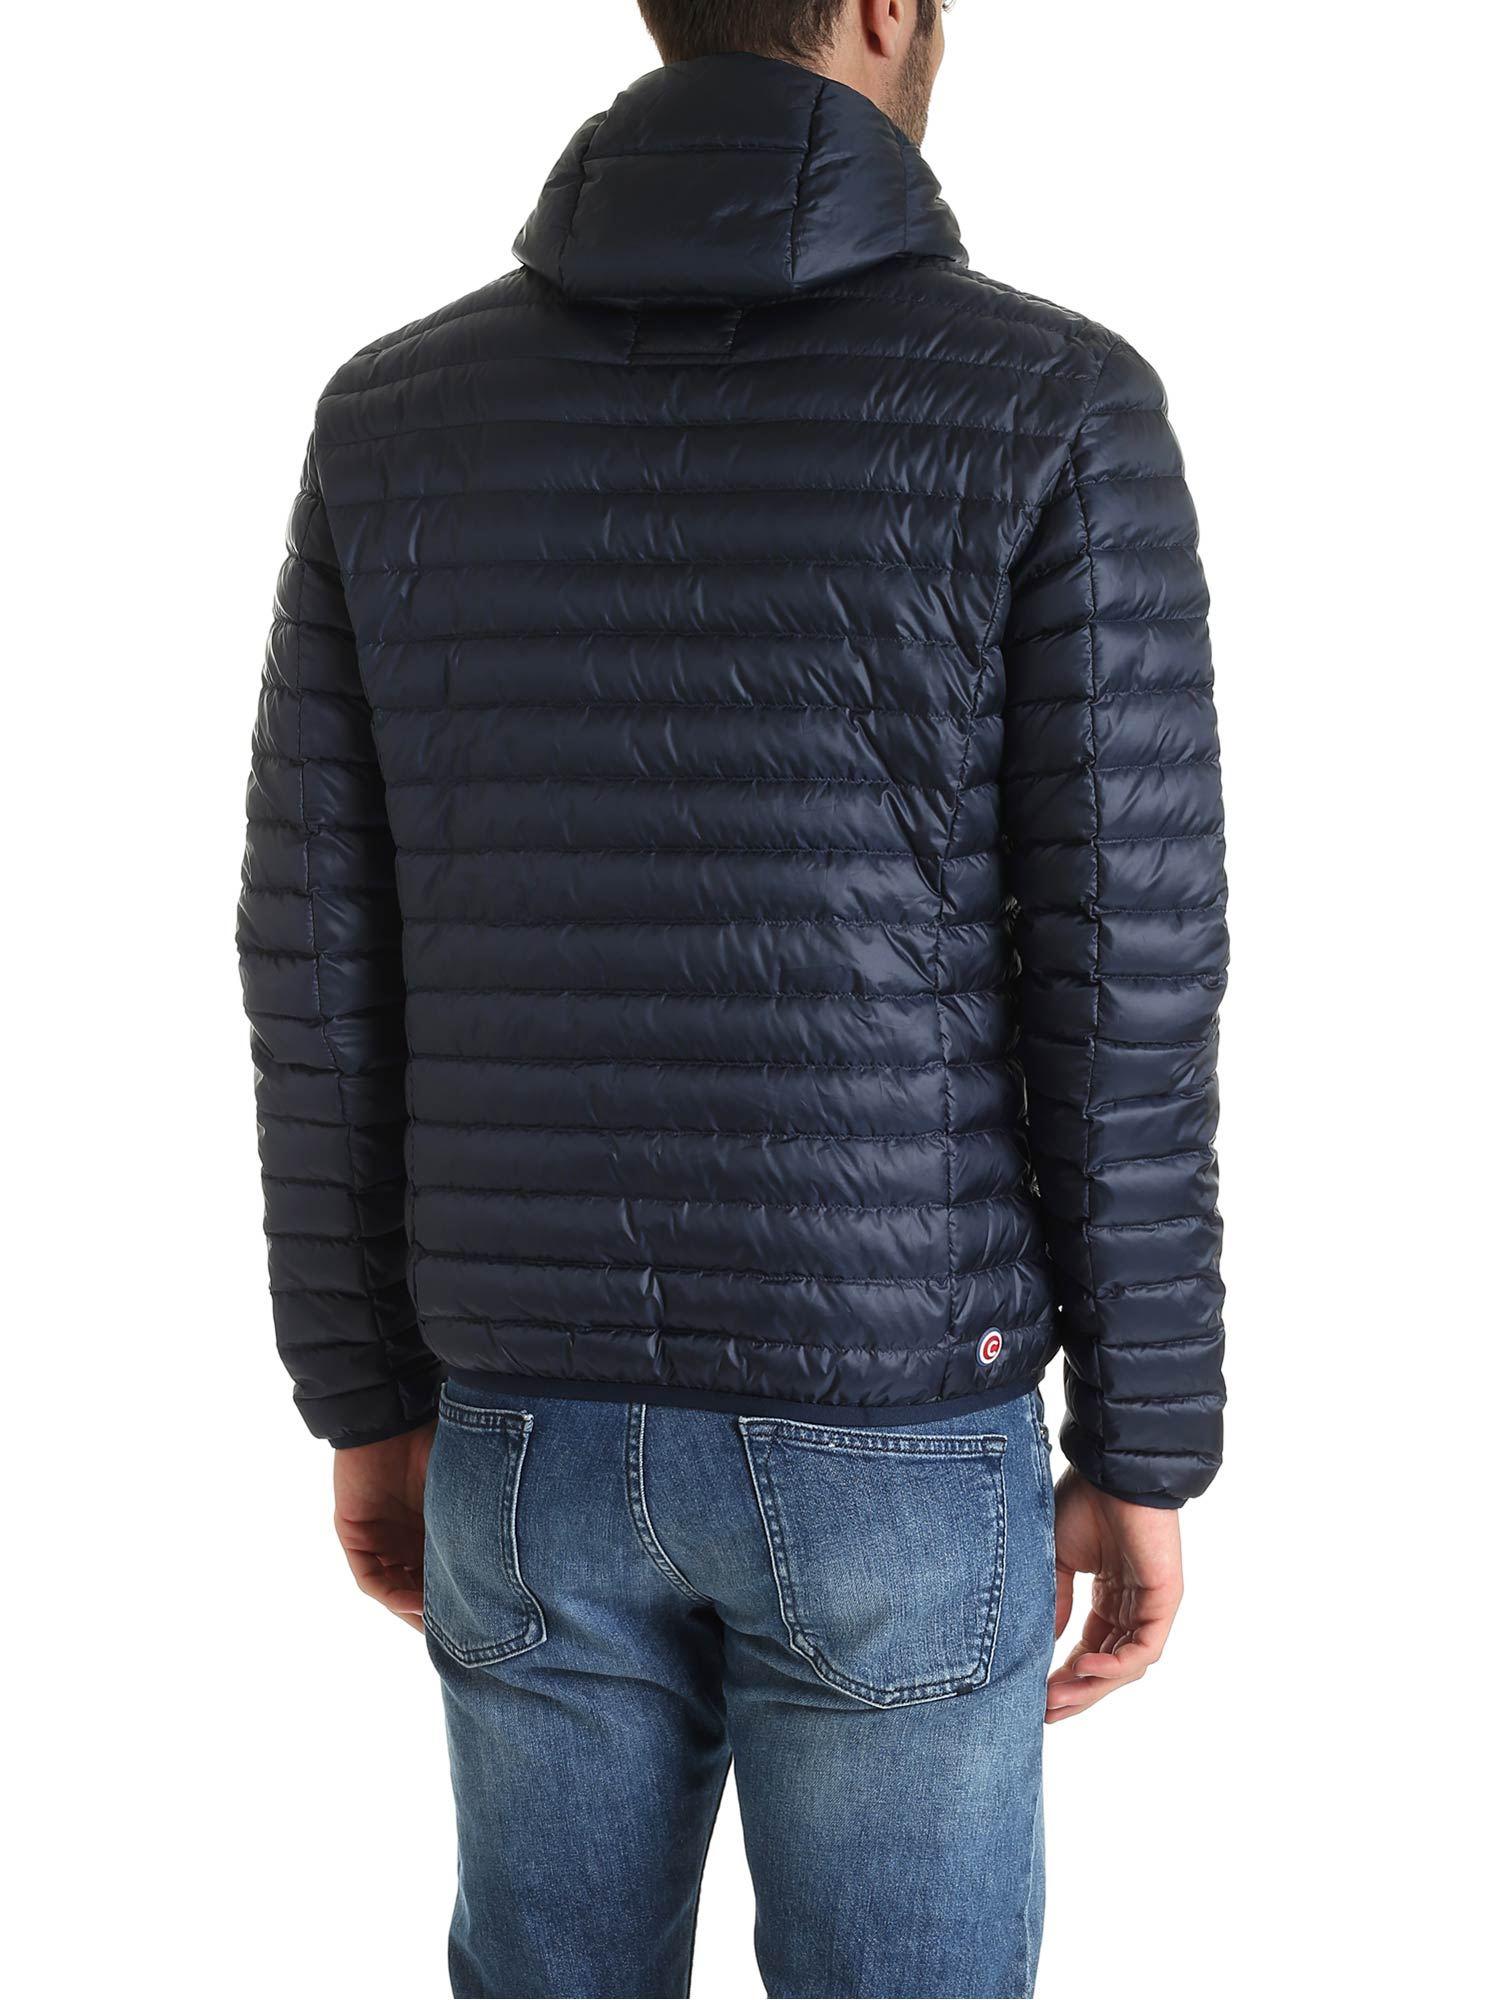 Colmar Quilted Down Jacket in Blue for Men - Lyst